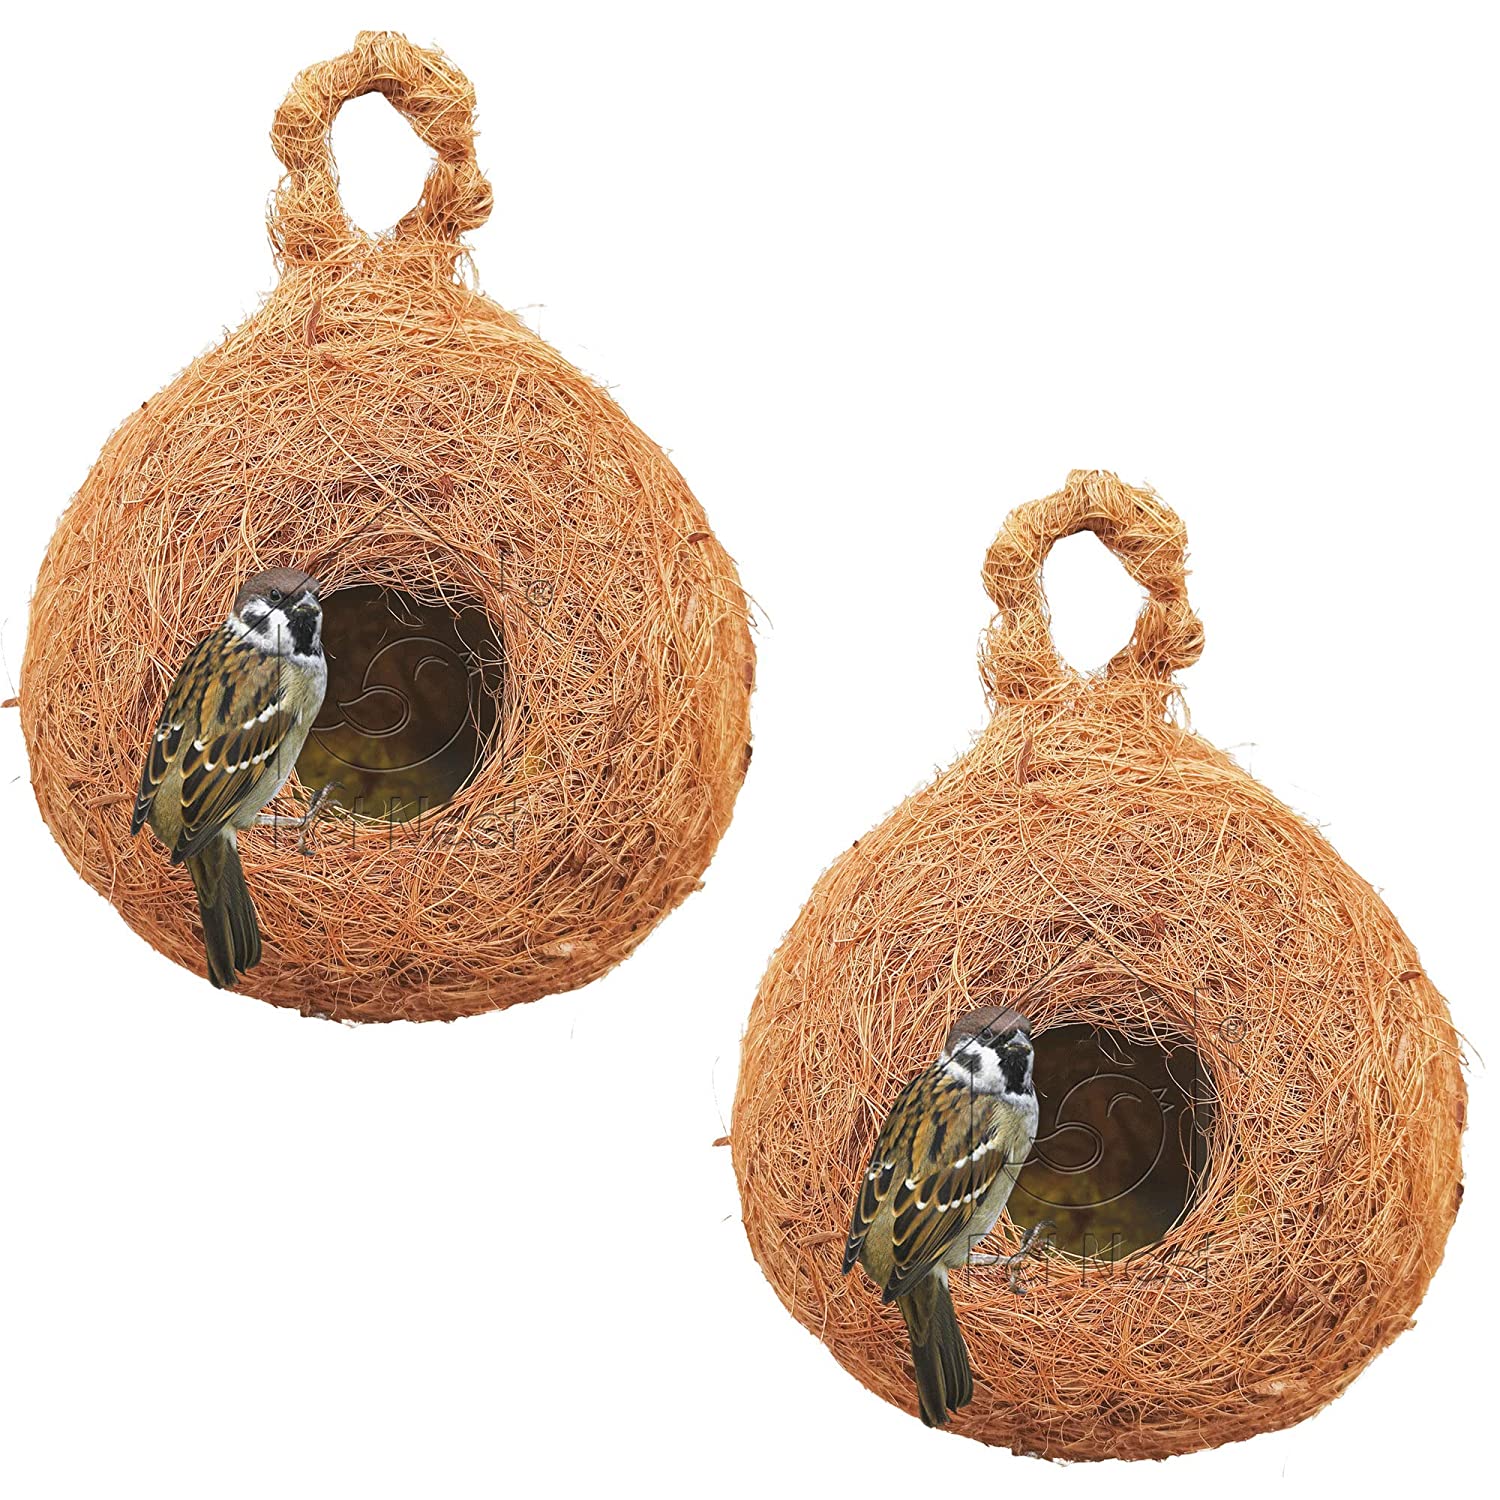 Safest House Organic Bird Nest Purely Handmade Love Birds/Sparrow  (Brown)-Set Of 2 By Petnest - Wildlifekart Is An Online Shop For Wildlife  And Nature Lovers.